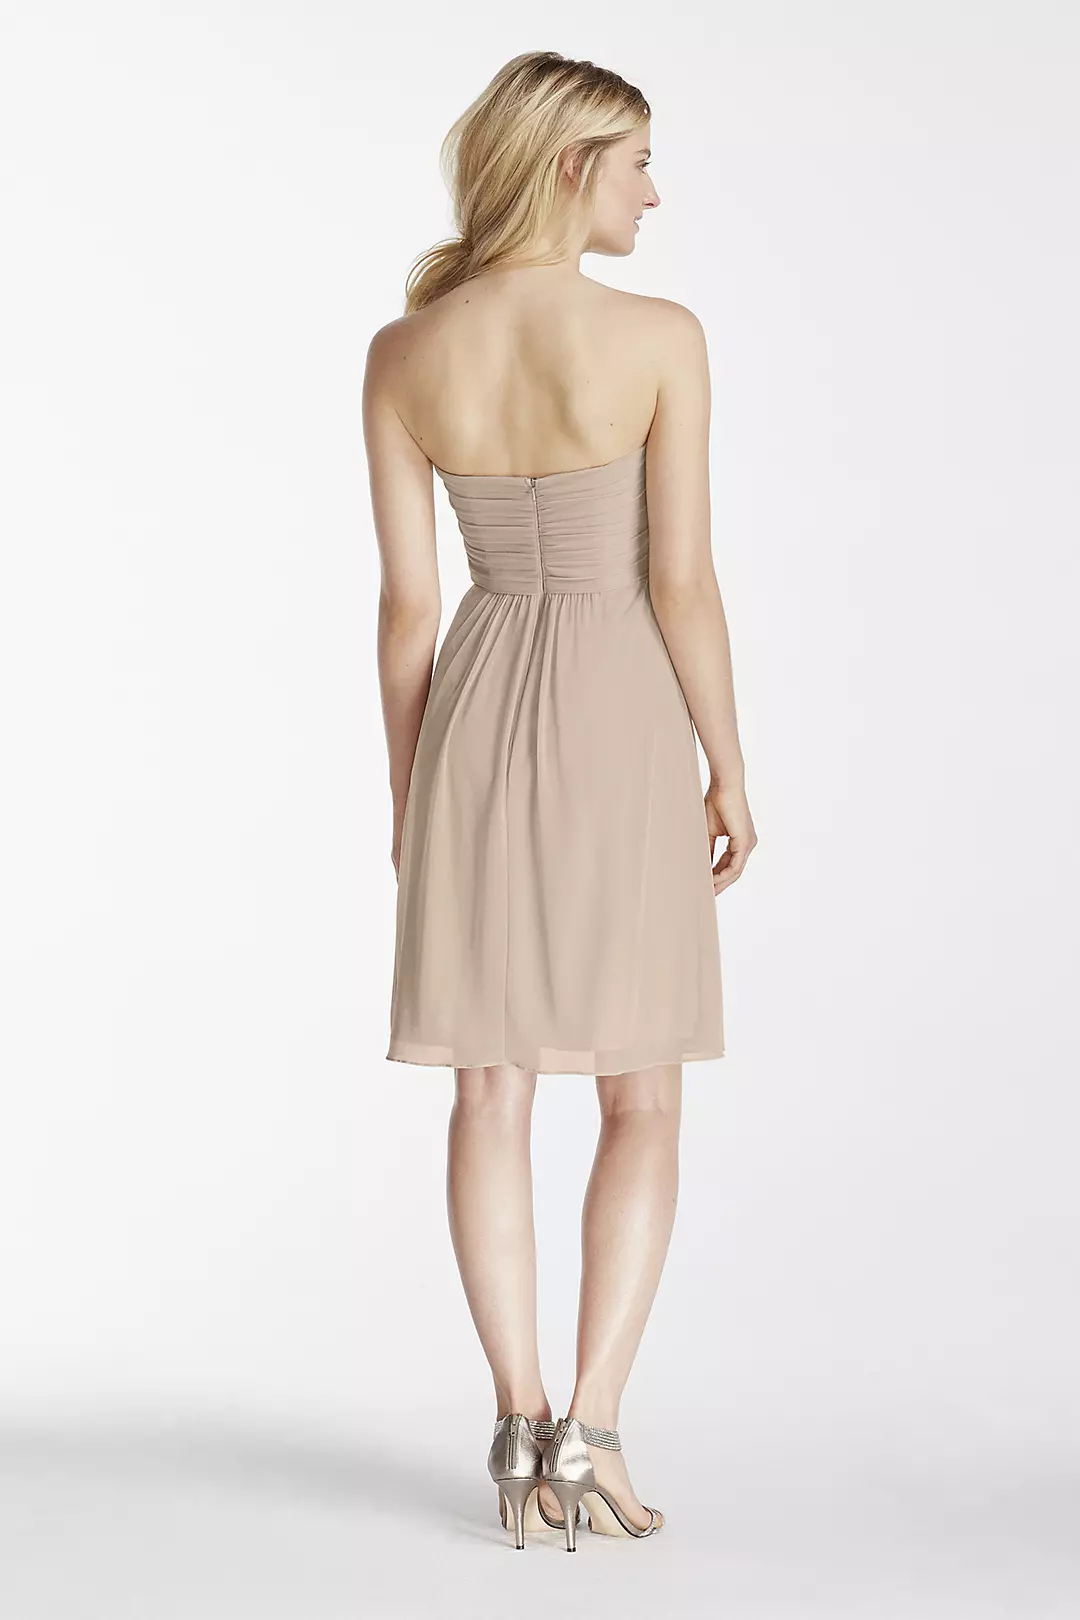 Short Strapless Bridesmaid Dress with Pleated Top | David's Bridal